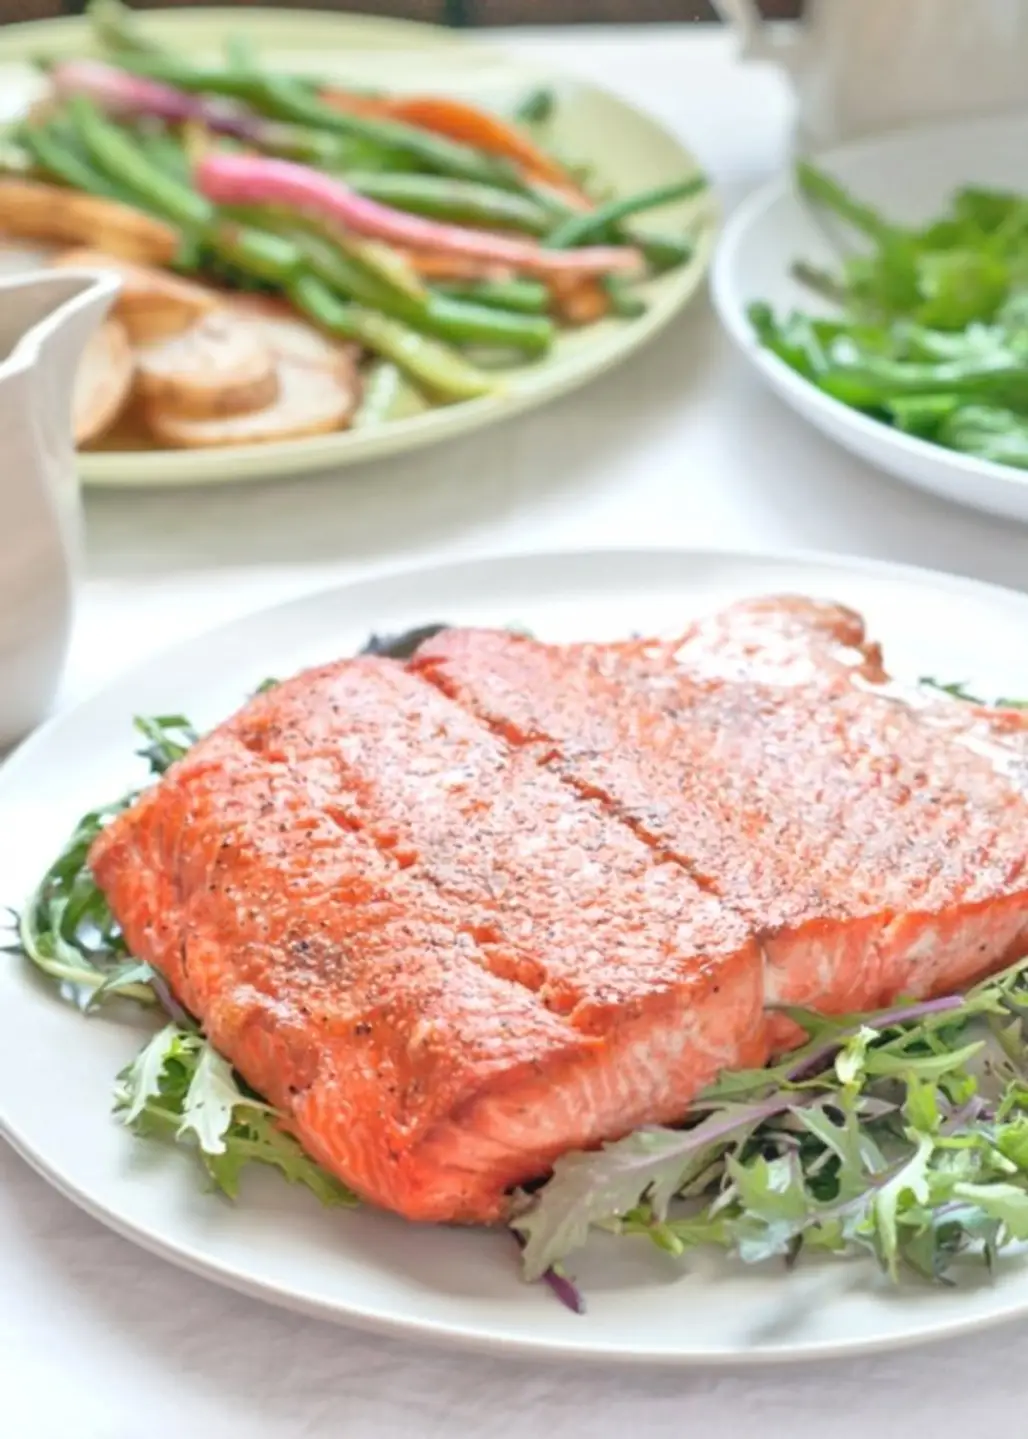 Salmon and Leafy Greens